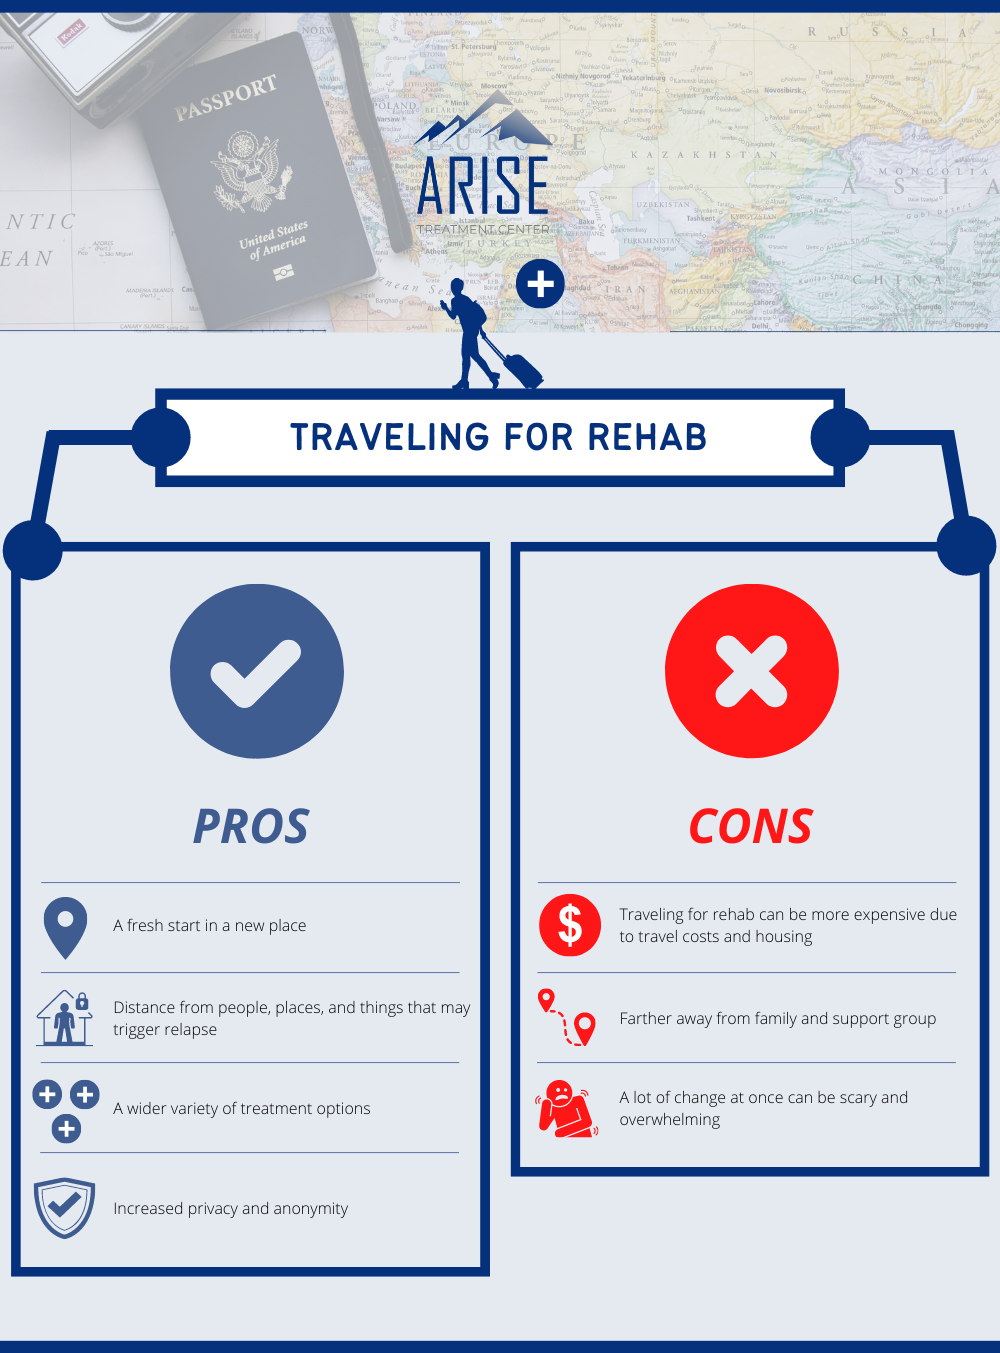 Pros and Cons of Traveling for Rehab